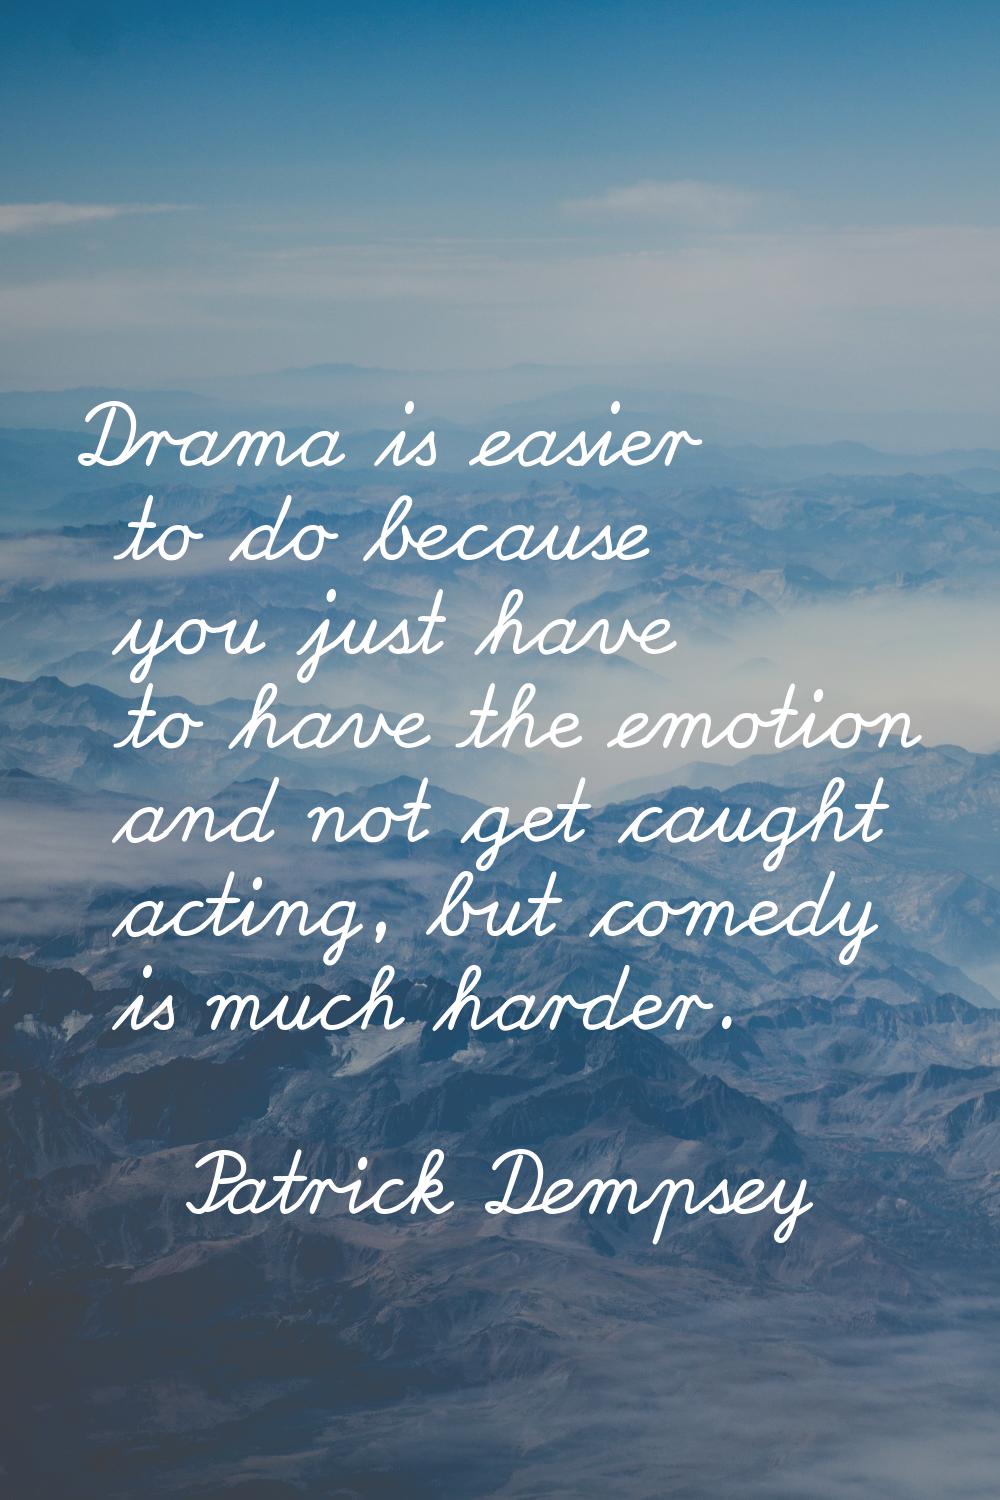 Drama is easier to do because you just have to have the emotion and not get caught acting, but come